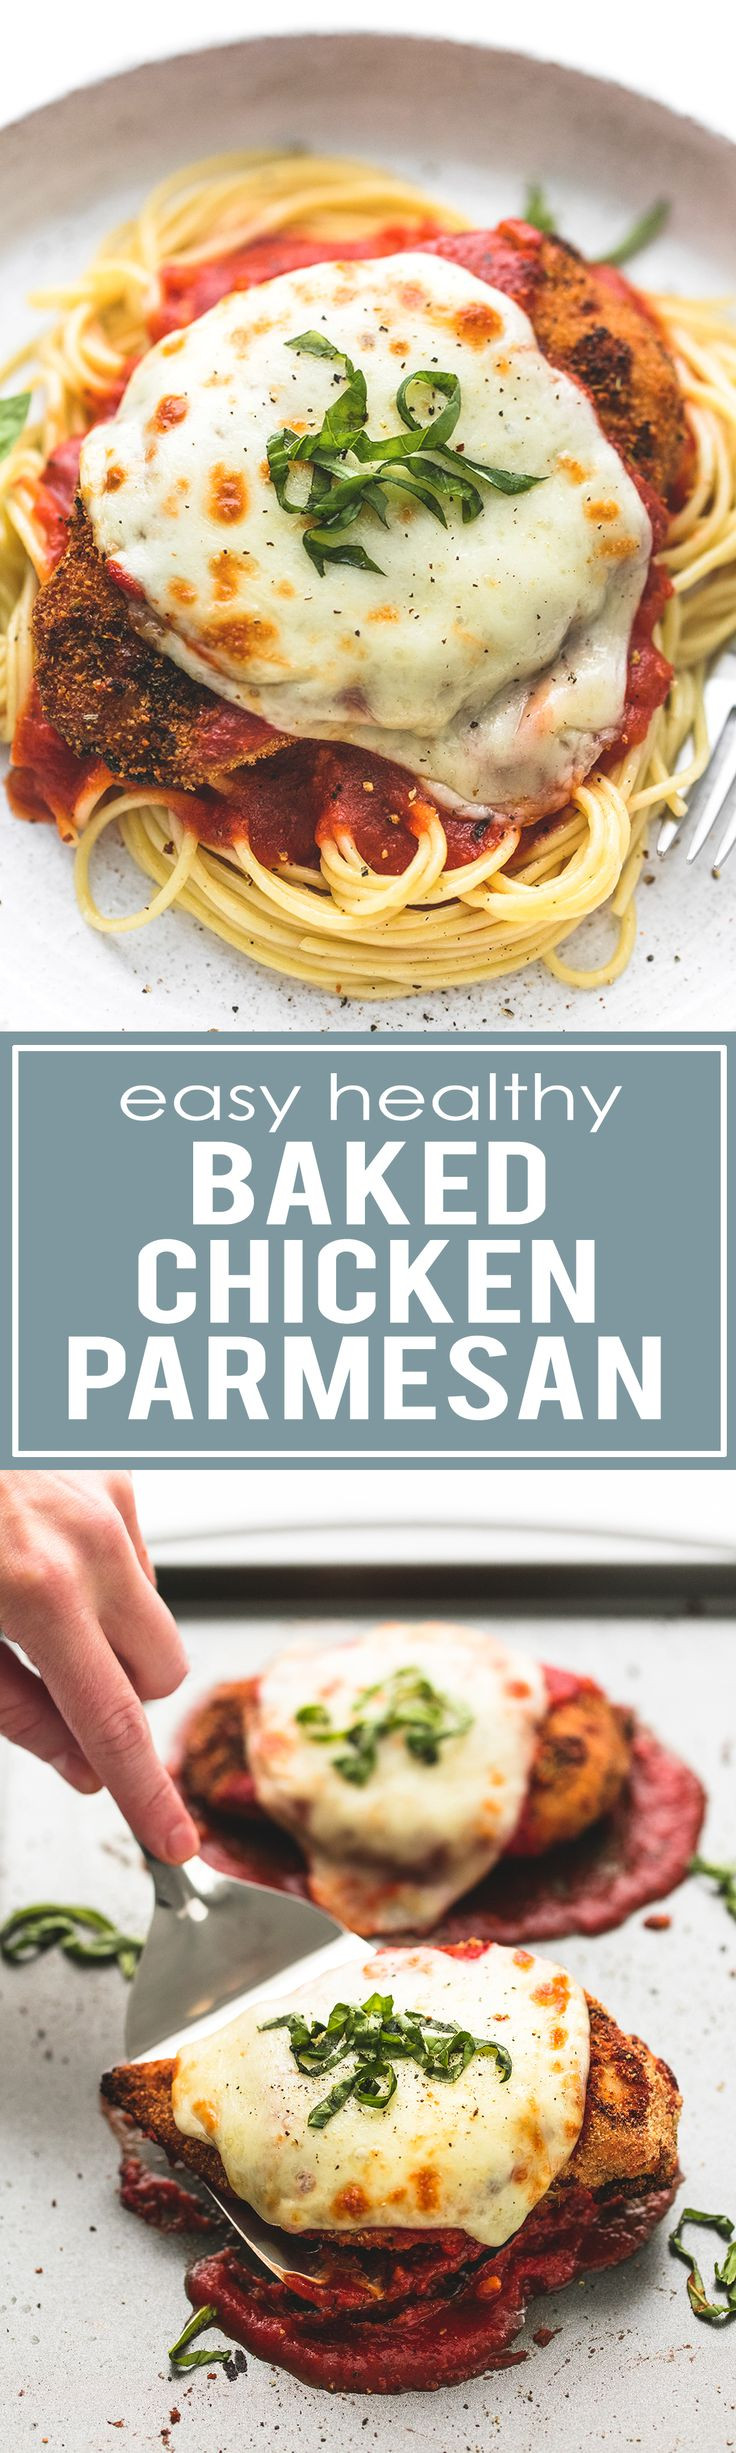 Healthy Baked Chicken Recipes Easy
 Easy Healthy Baked Chicken Parmesan